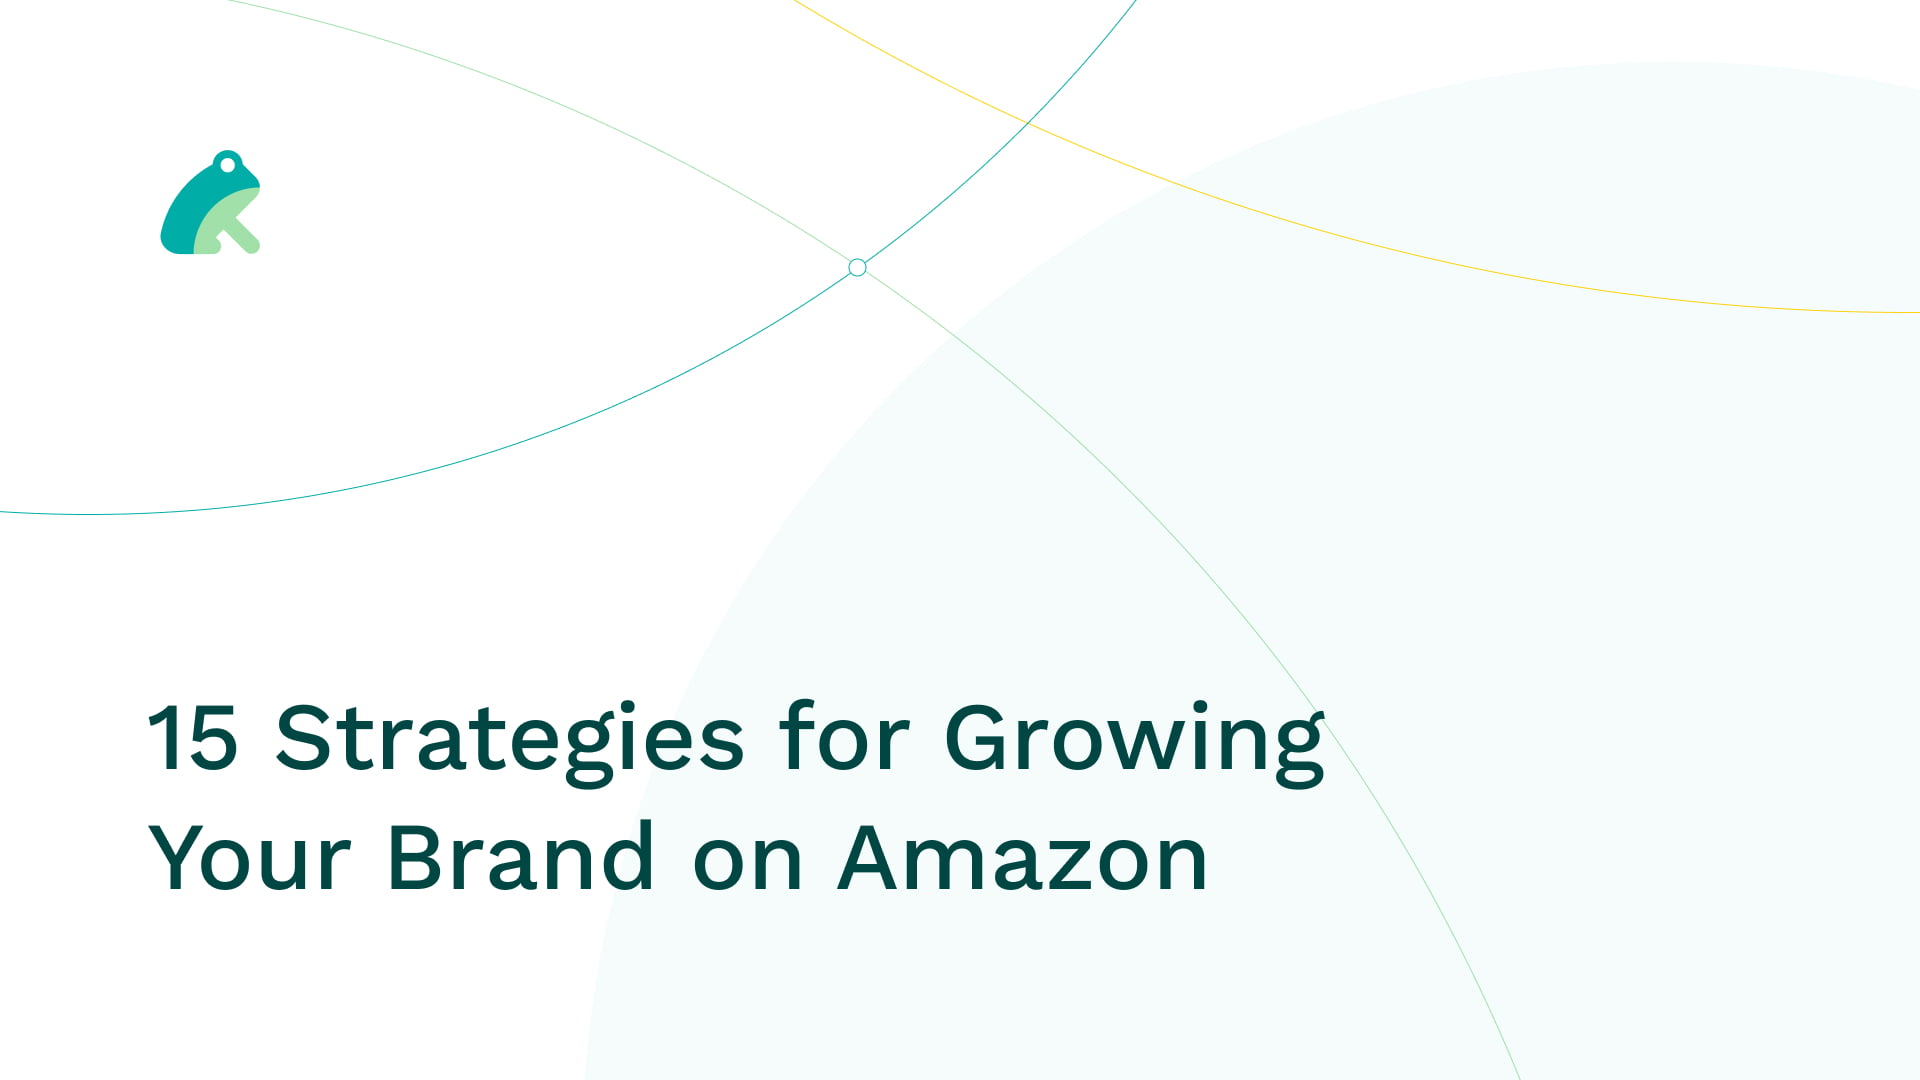 15 Strategies for Growing Your Brand on Amazon